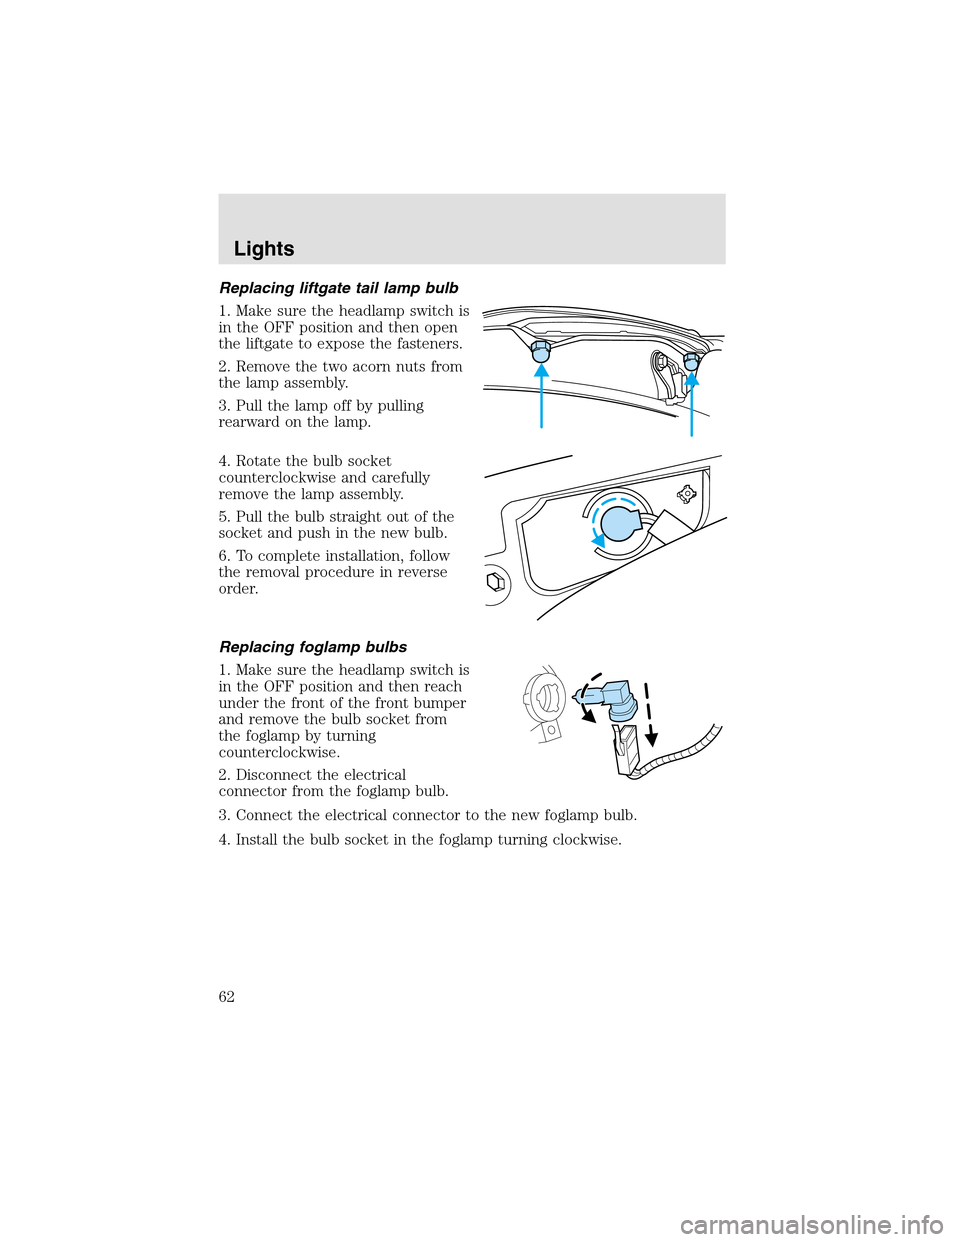 LINCOLN AVIATOR 2003  Owners Manual Replacing liftgate tail lamp bulb
1. Make sure the headlampswitch is
in the OFF position and then open
the liftgate to expose the fasteners.
2. Remove the two acorn nuts from
the lampassembly.
3. Pull